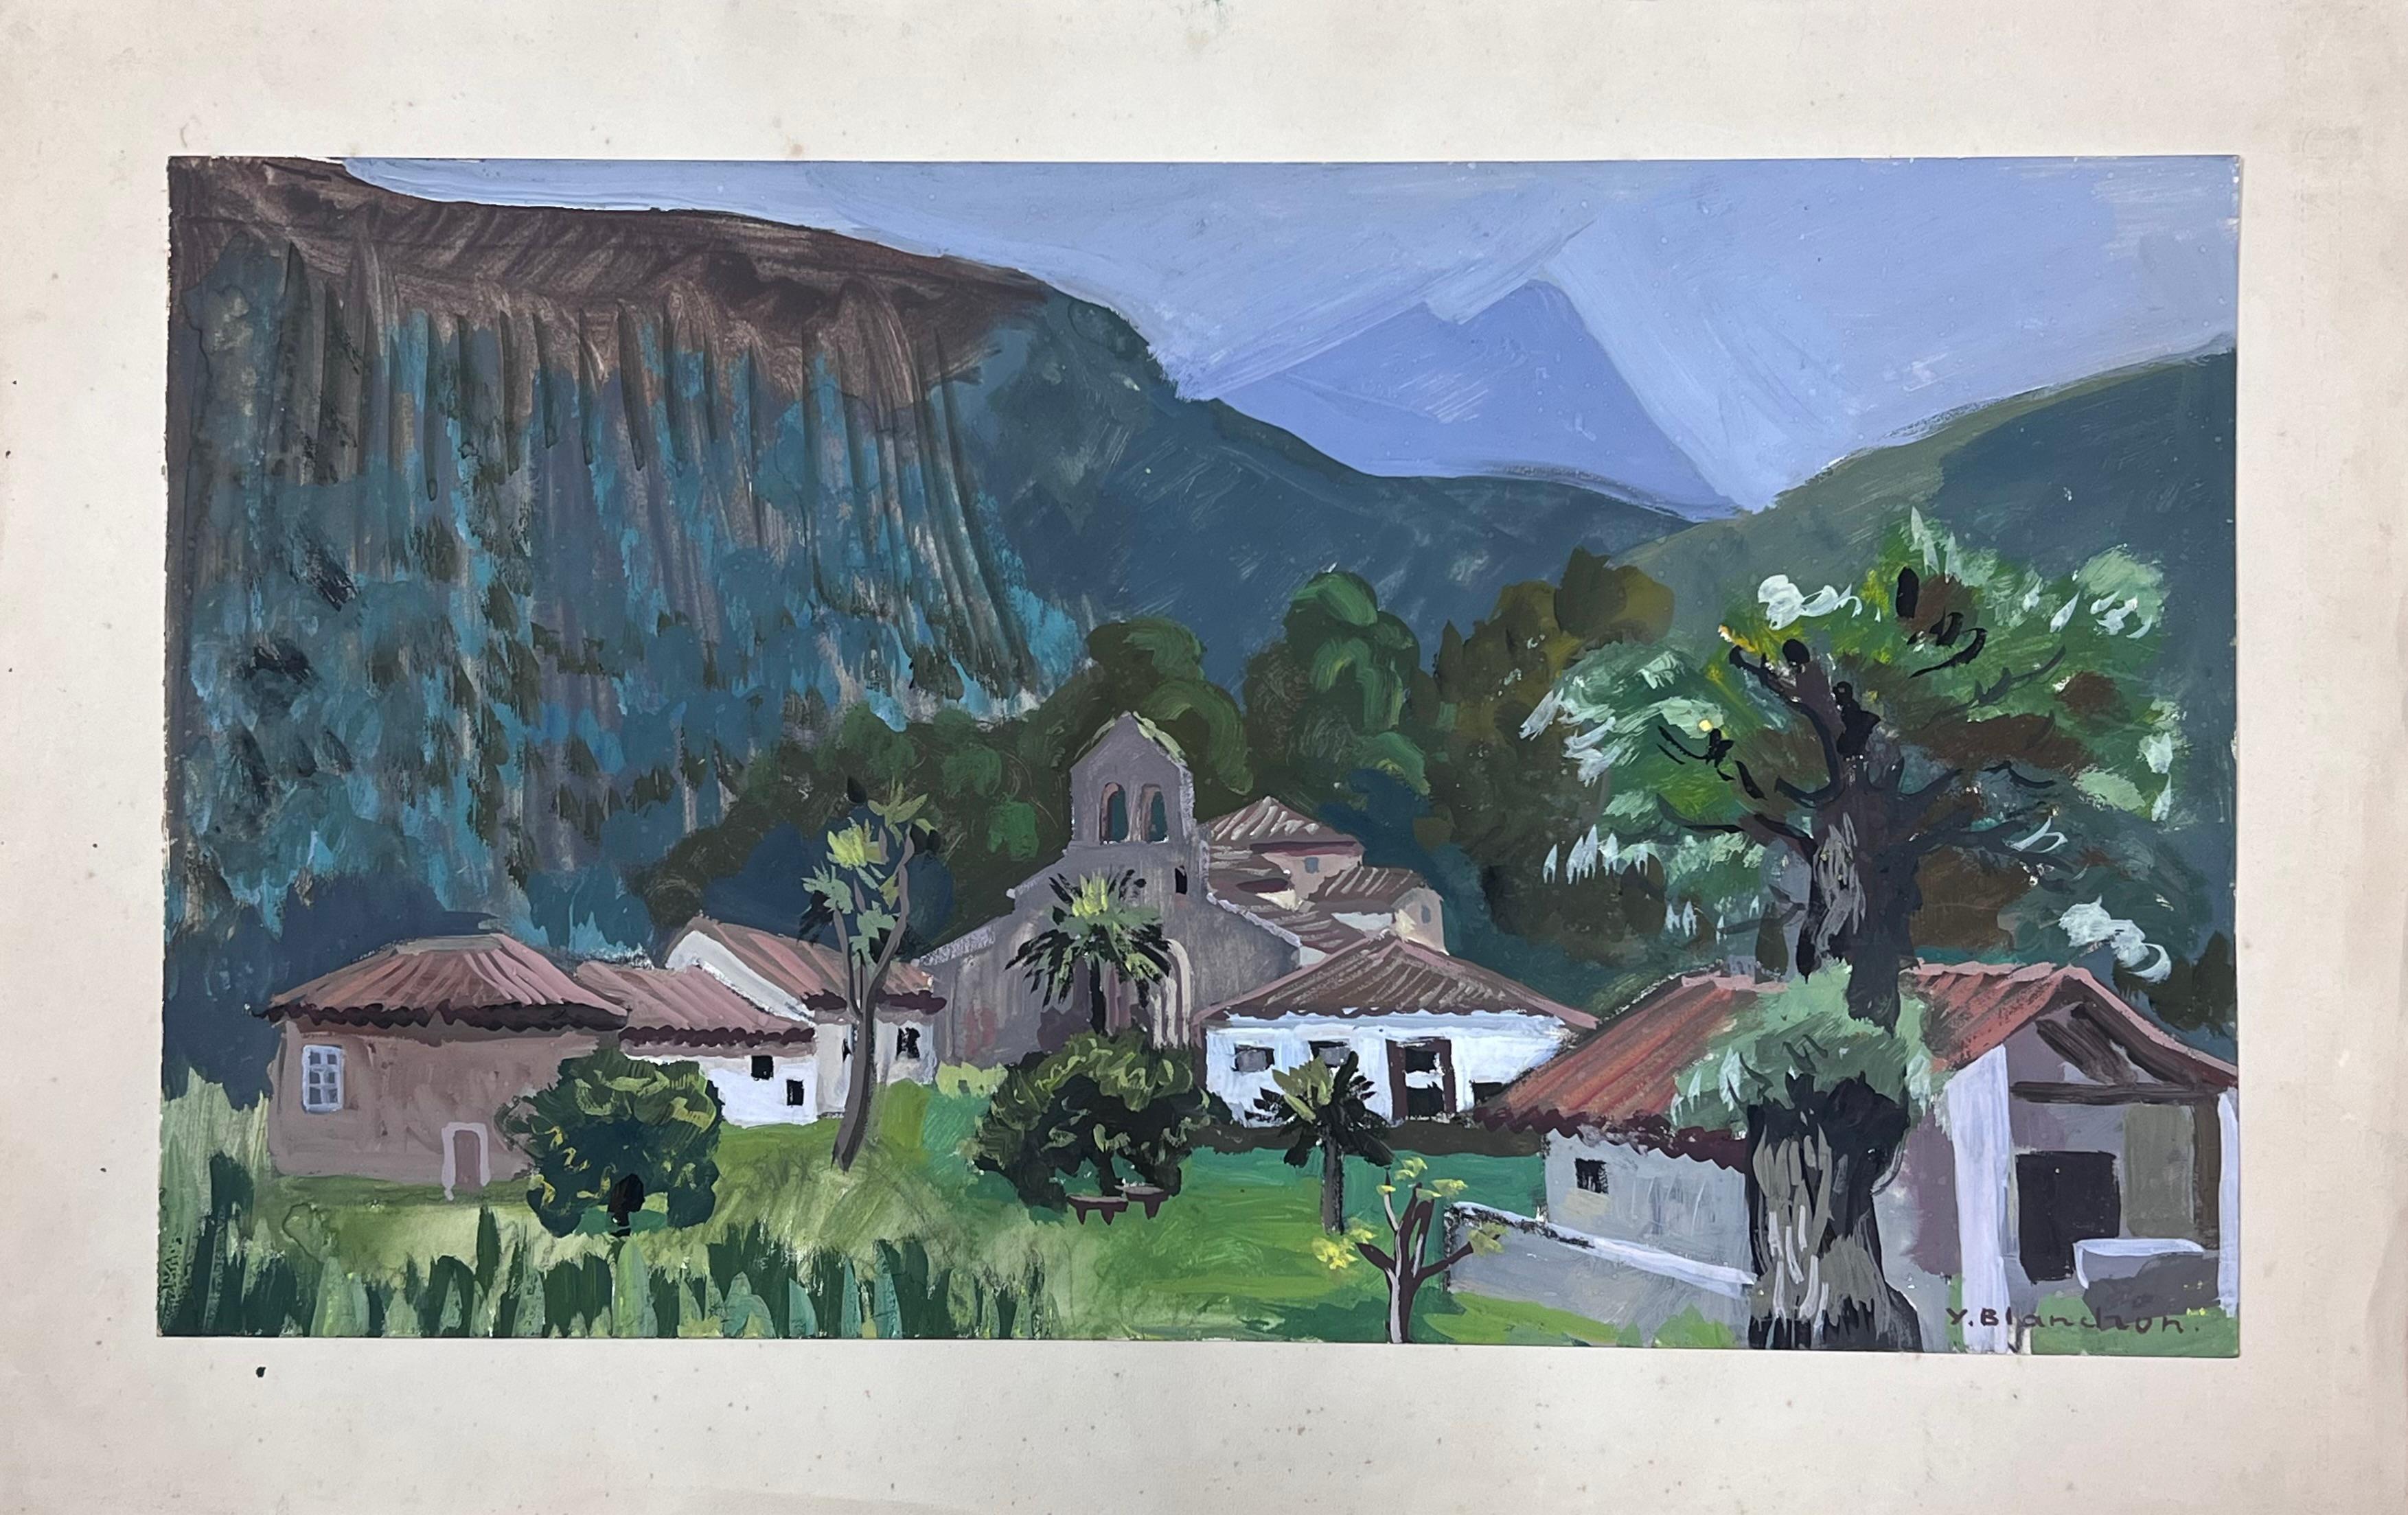 French Mountains
signed by Y. Blanchon, French 1950's Impressionist 
artist gouache on artist paper, stuck on card
overall size: 12.5 x 19.5 inches
painting: 9.5 x 16 inches
provenance: from a large private collection of this artists work in